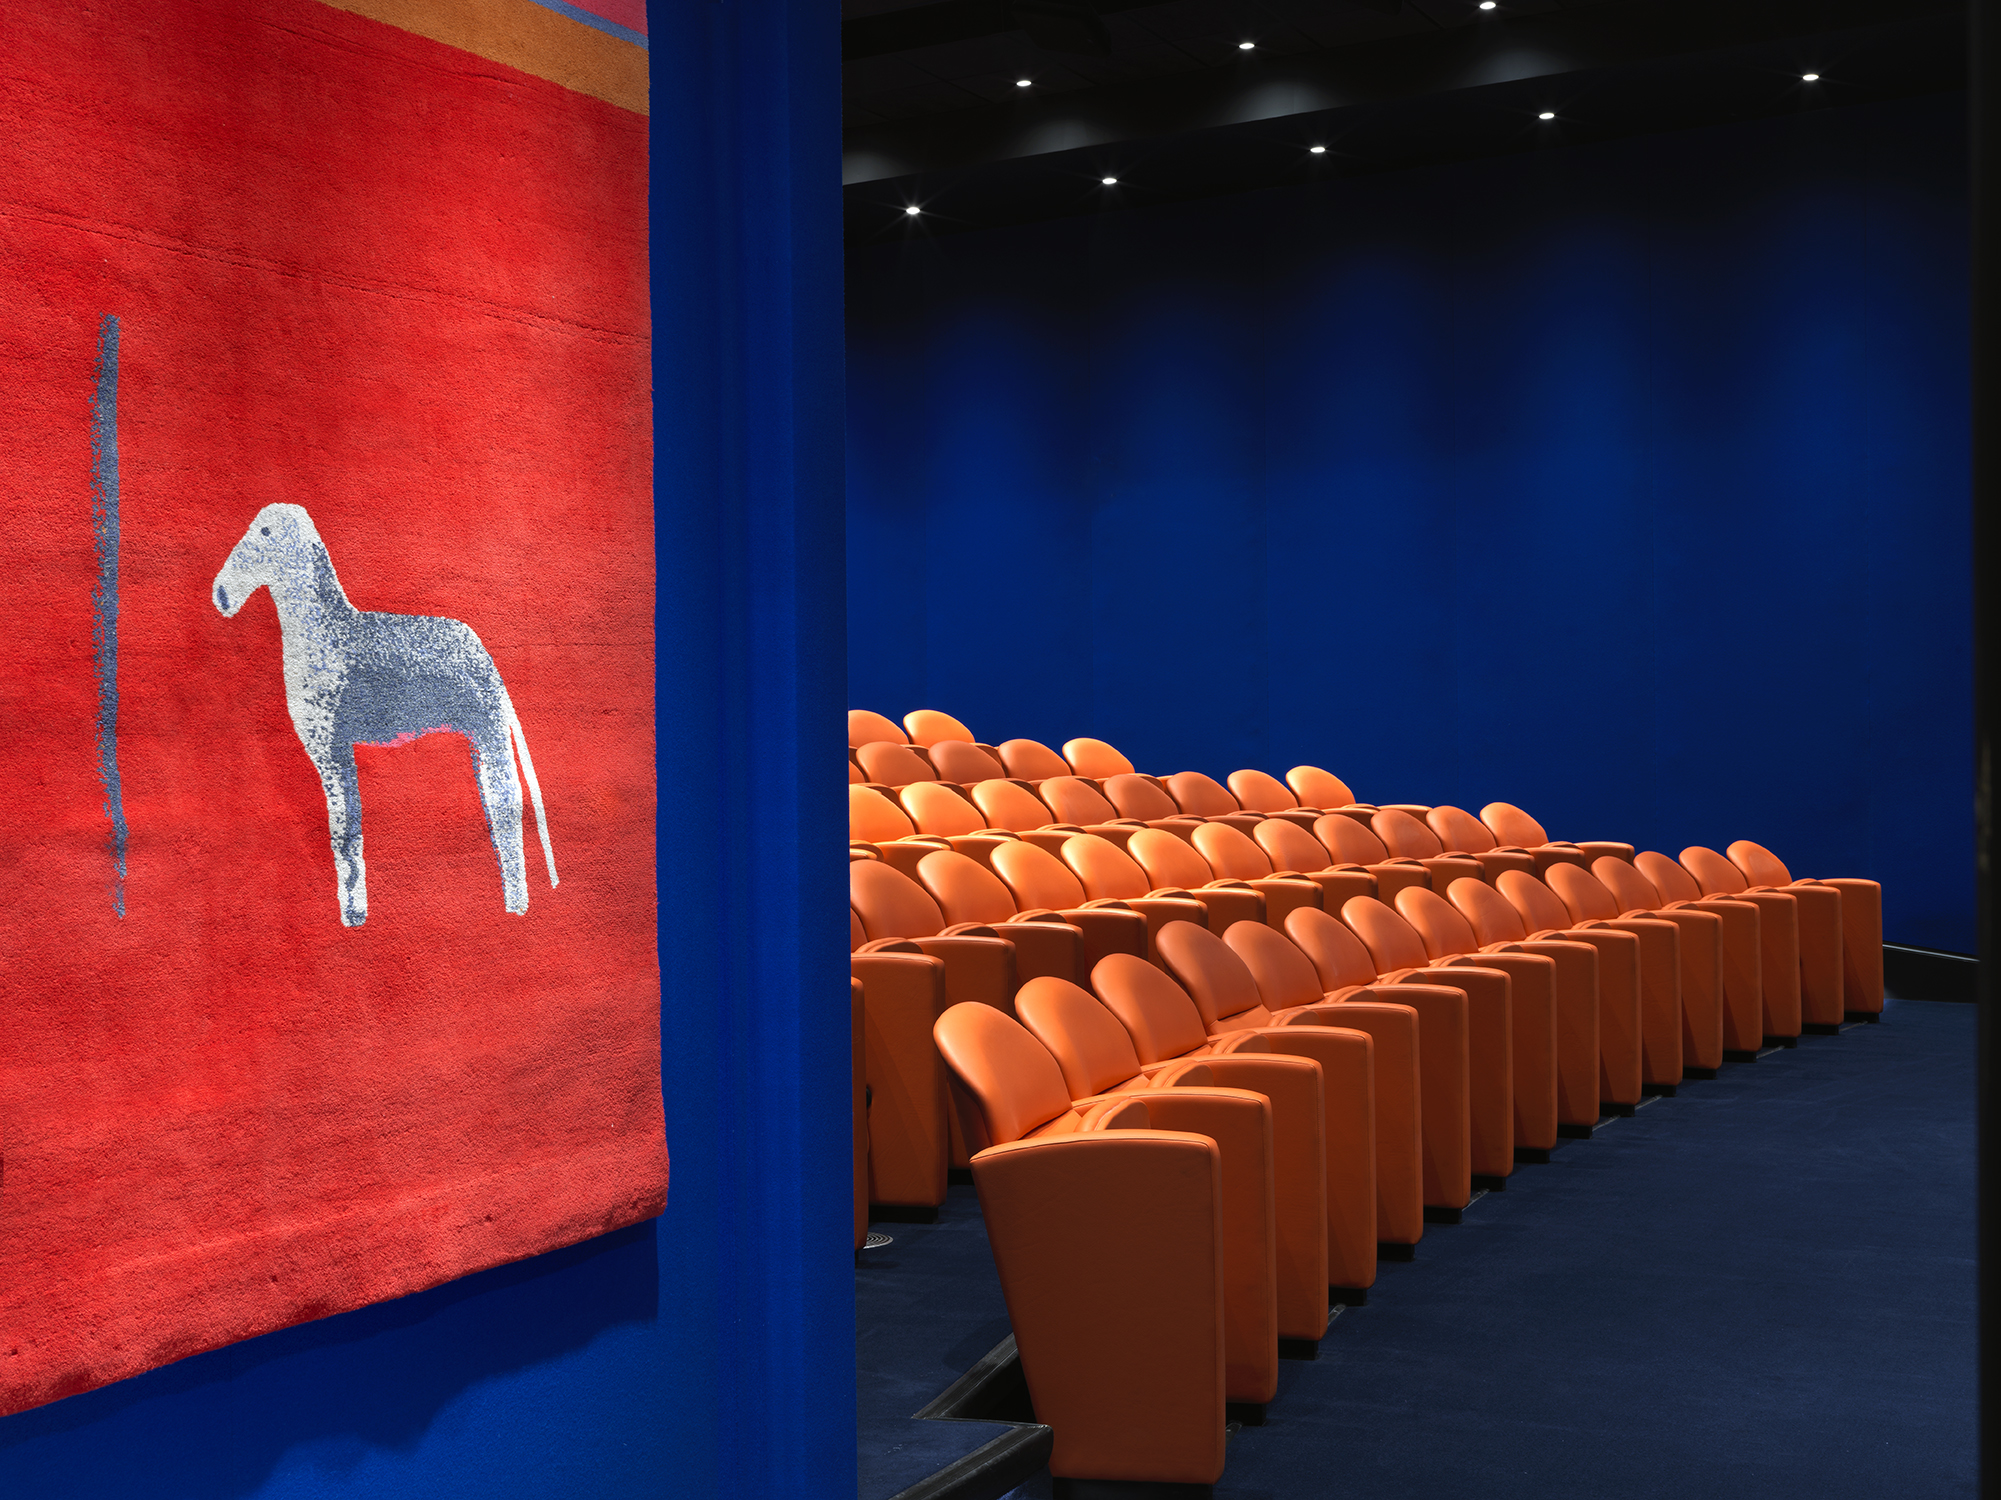 The entry to the state-of-the-art screening room with 130 comfortable leather seats in bright coral and electric blue walling.